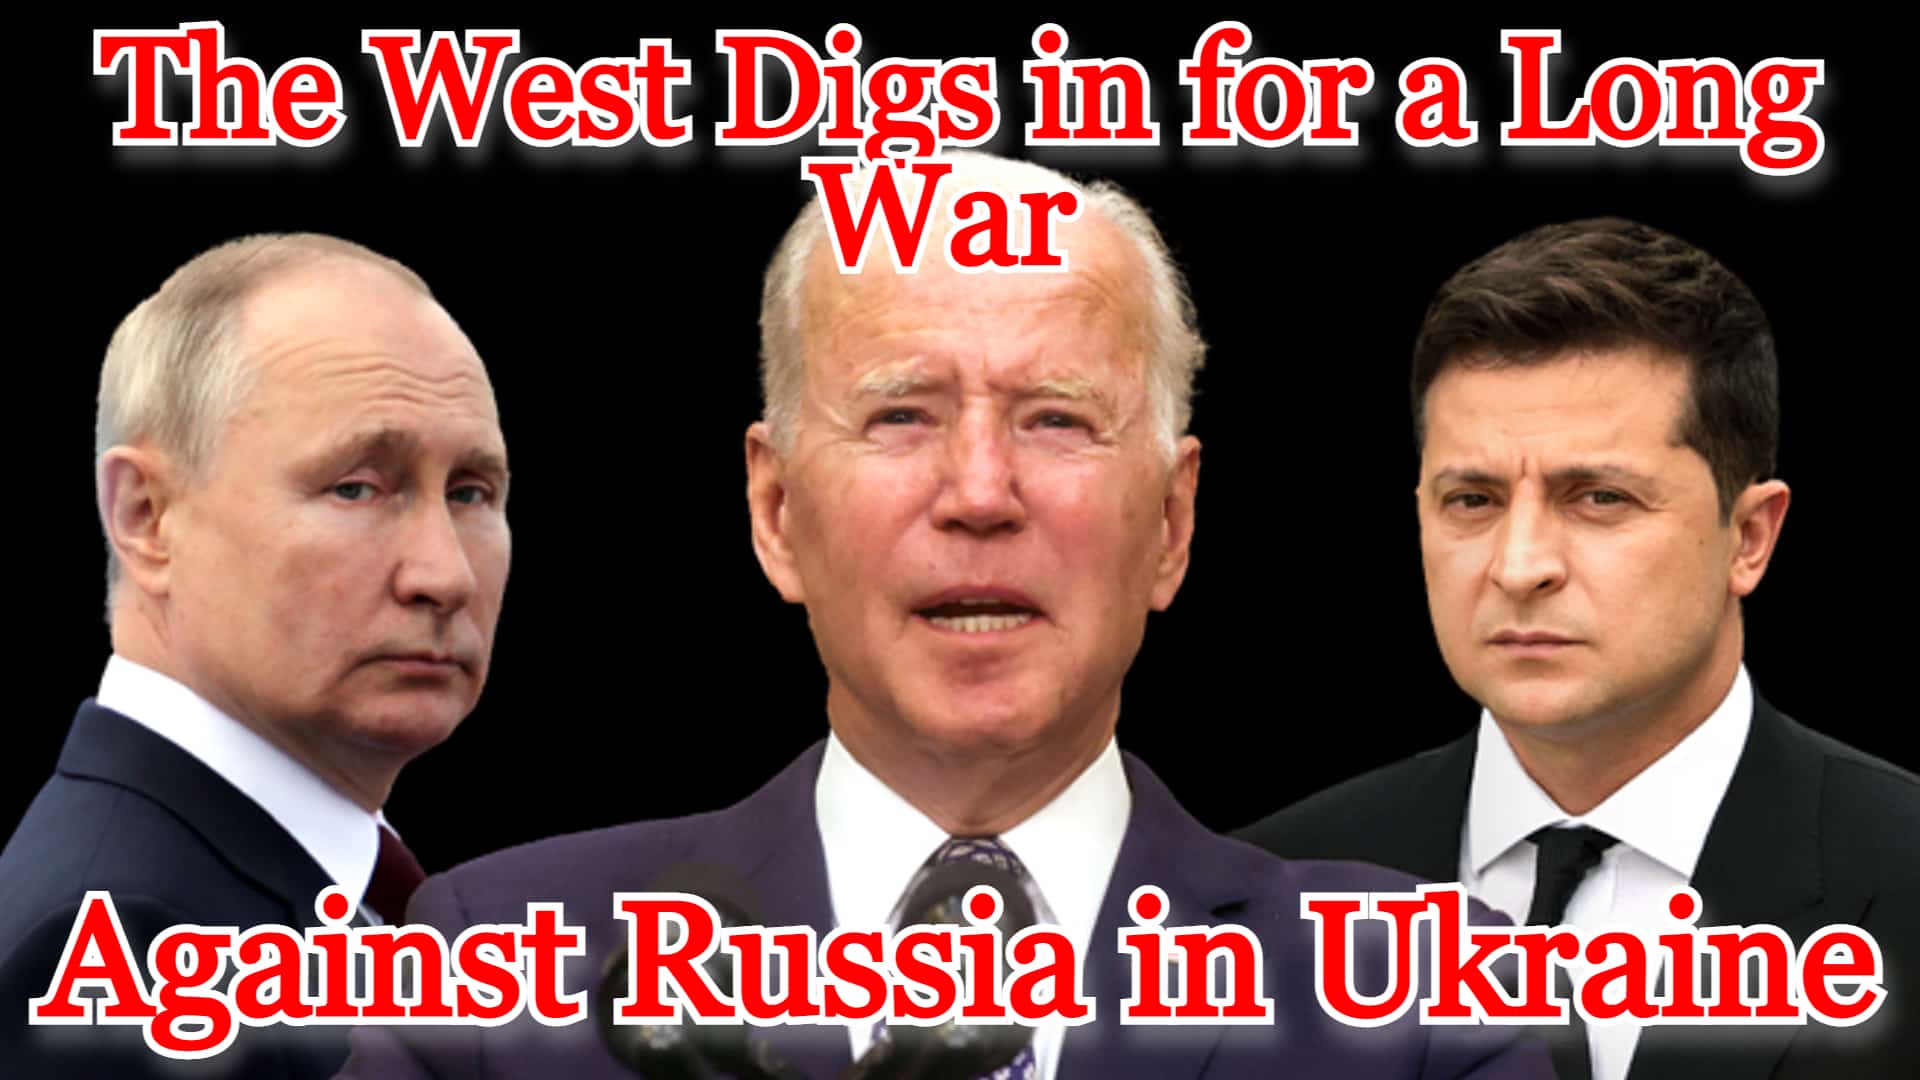 COI #291: The West Digs in for a Long War Against Russia in Ukraine